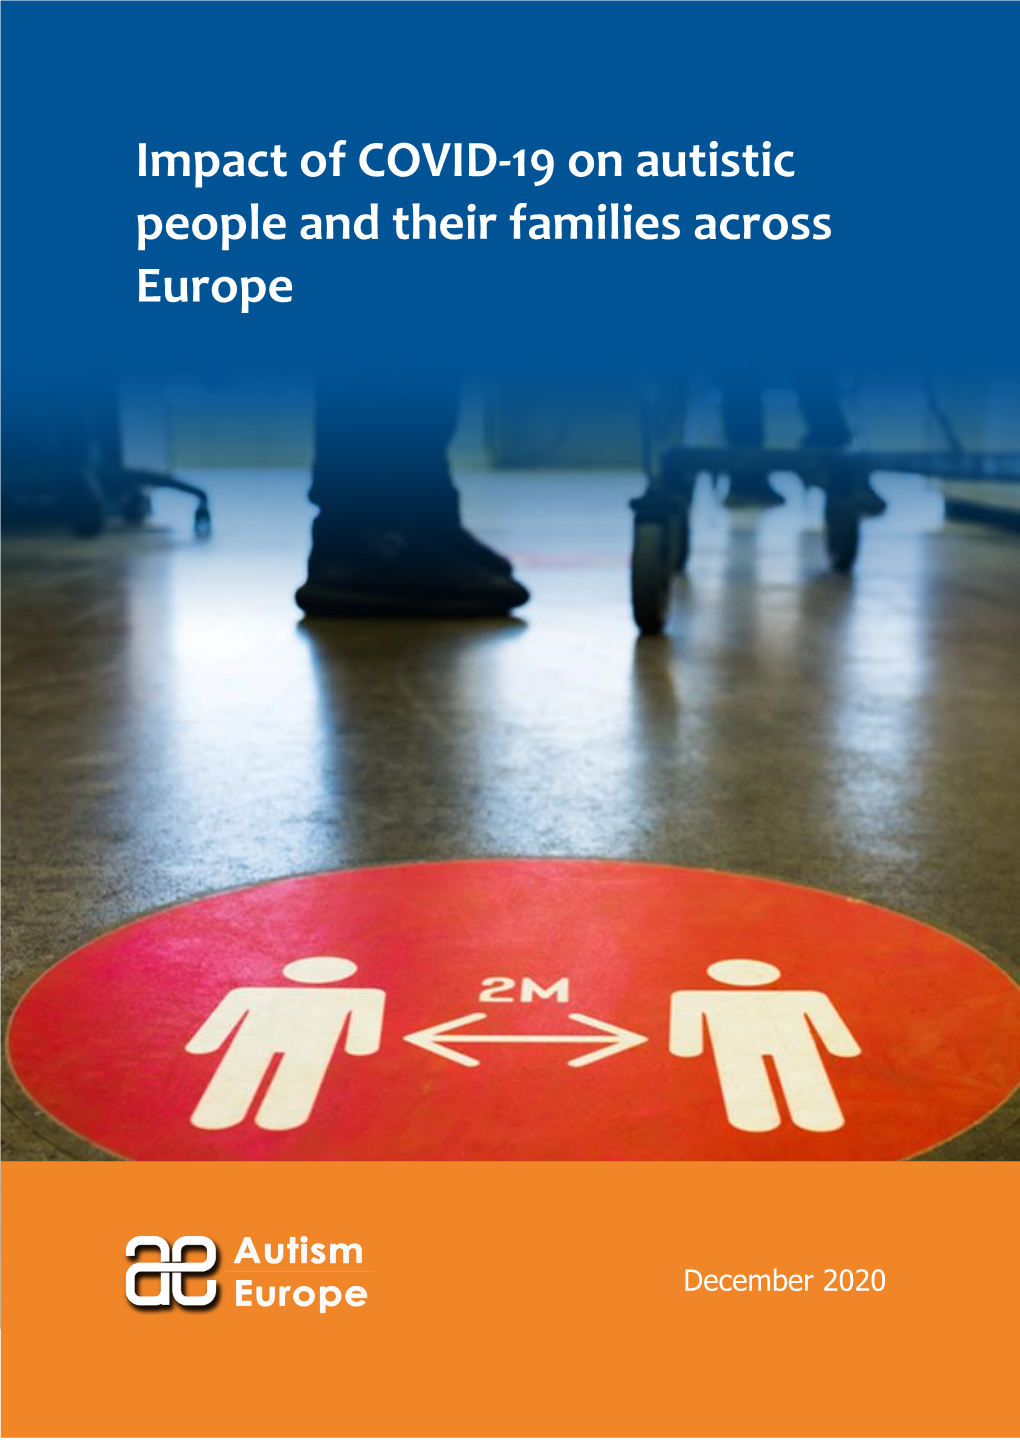 Impact of COVID-19 on Autistic People and Their Families Across Europe